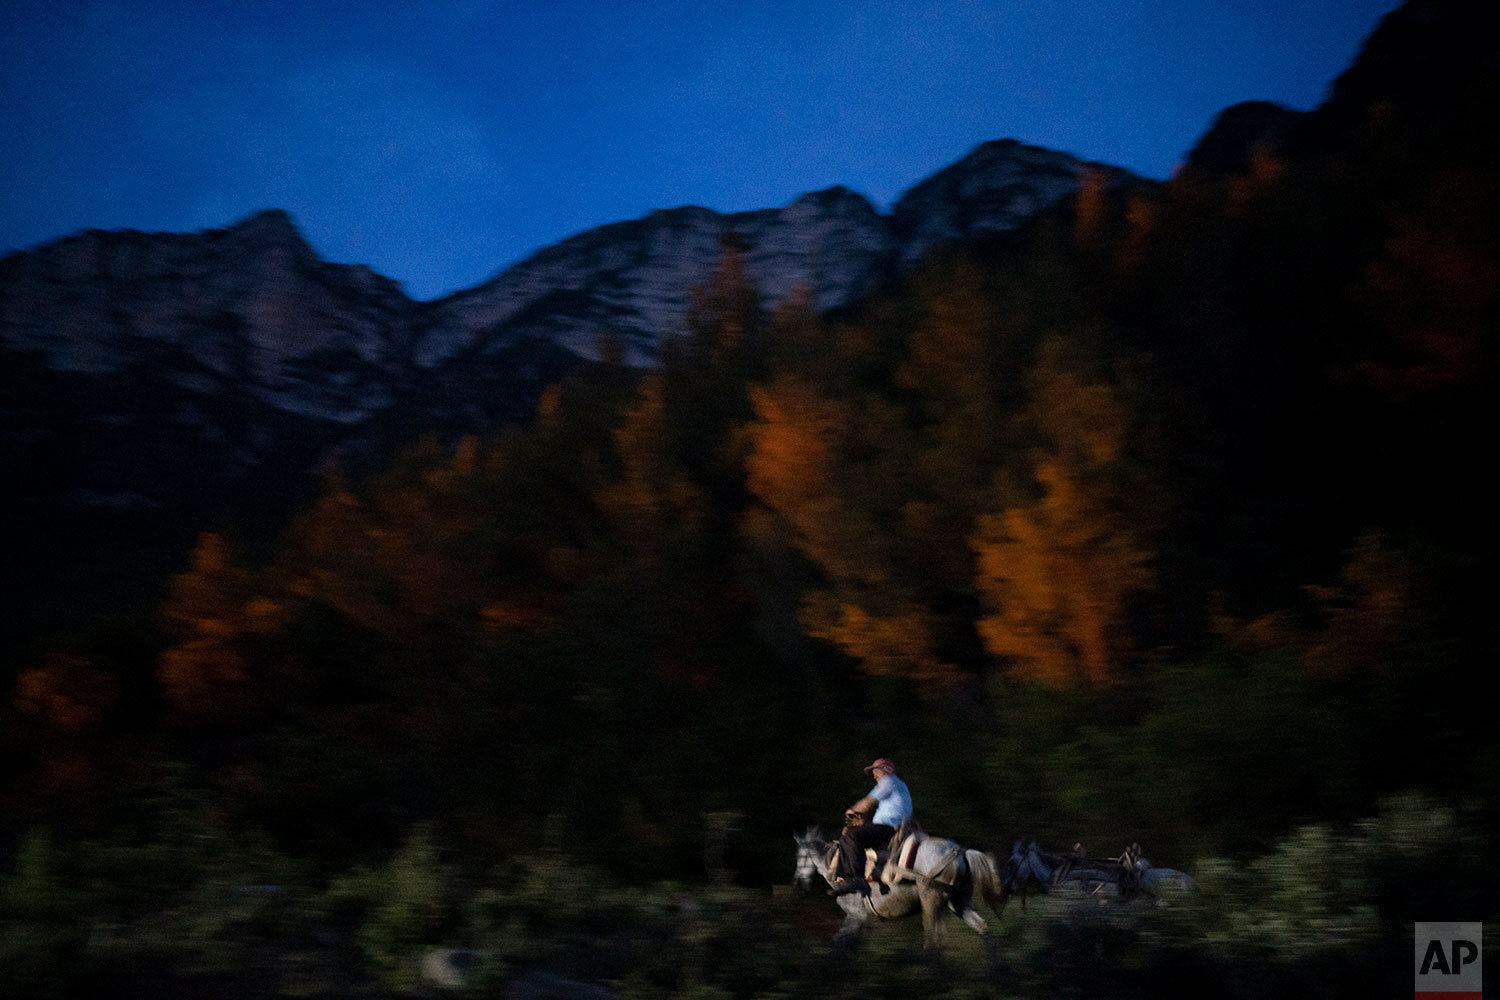  In this June 22, 2019 photo, Jonuz Jonuzi, 70, rides his horse on the banks of the Vjosa River in the Kelcyre Gorge, Albania. He raised his children here and now watches his grandchildren play in the Vjosa's waters. Before dawn each day, he crosses 